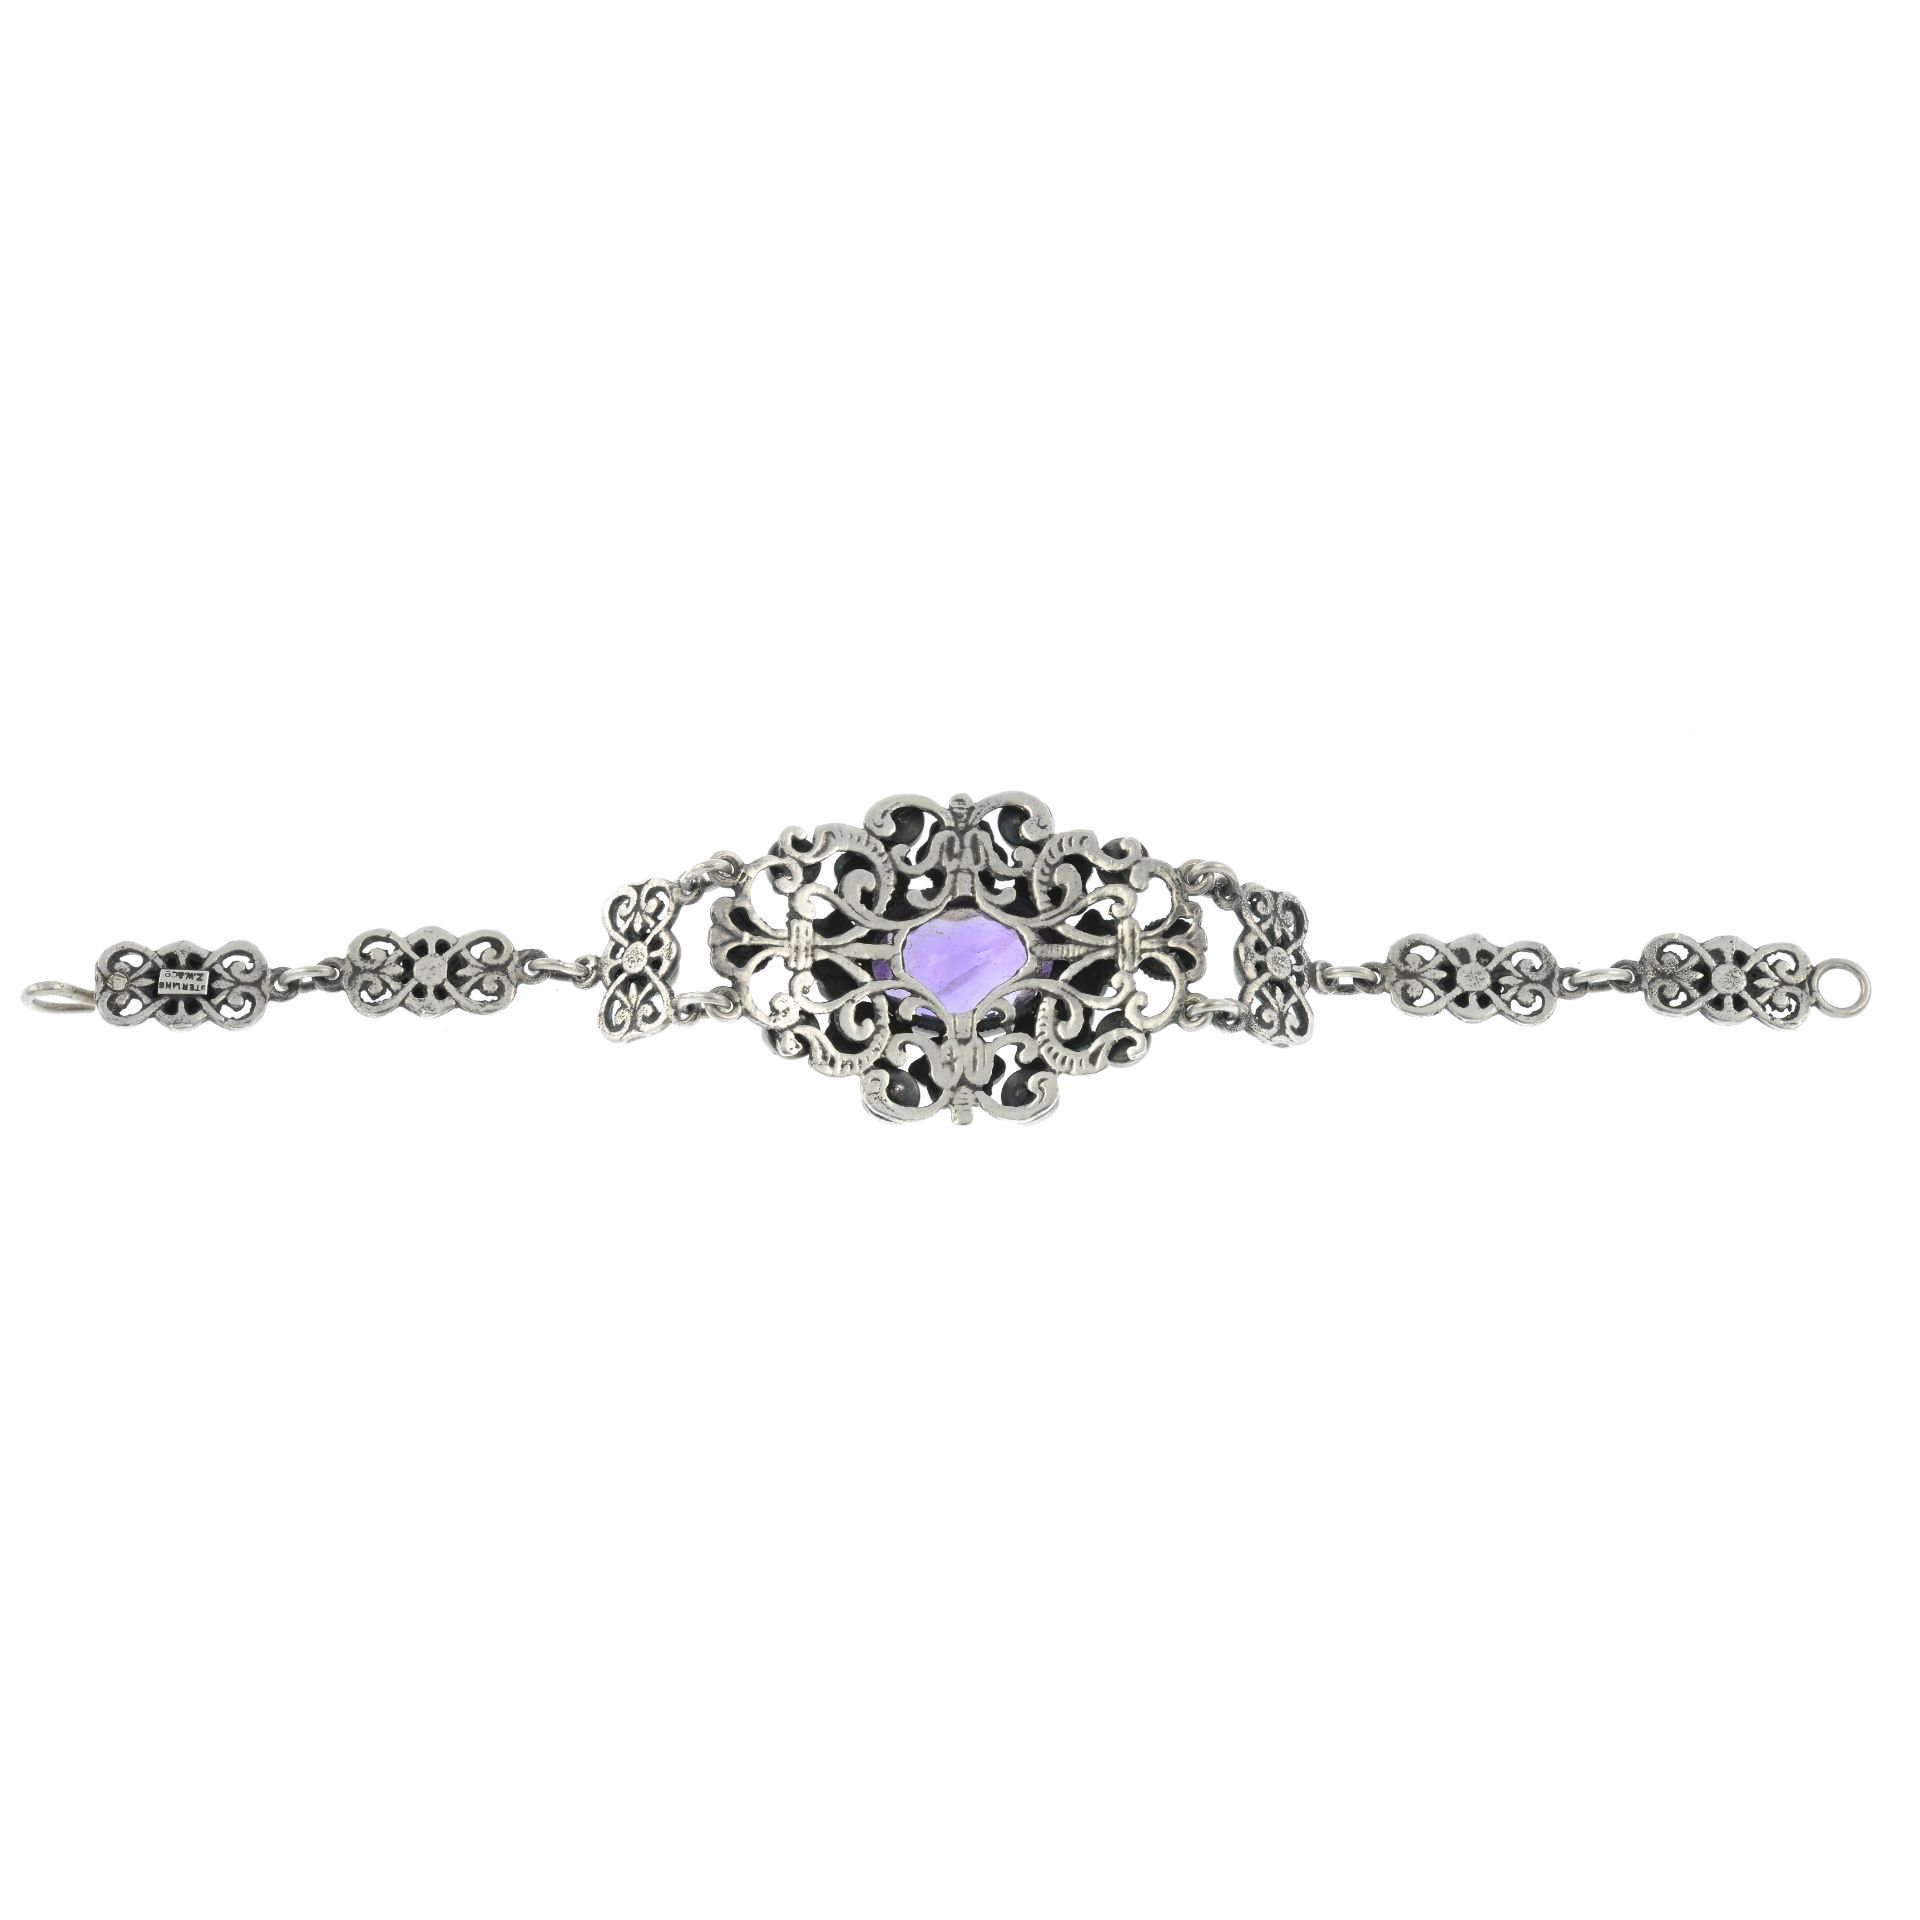 An amethyst bracelet with floral motif, by Zoltan White & Co.Signed Z.W.&Co. - Image 3 of 3